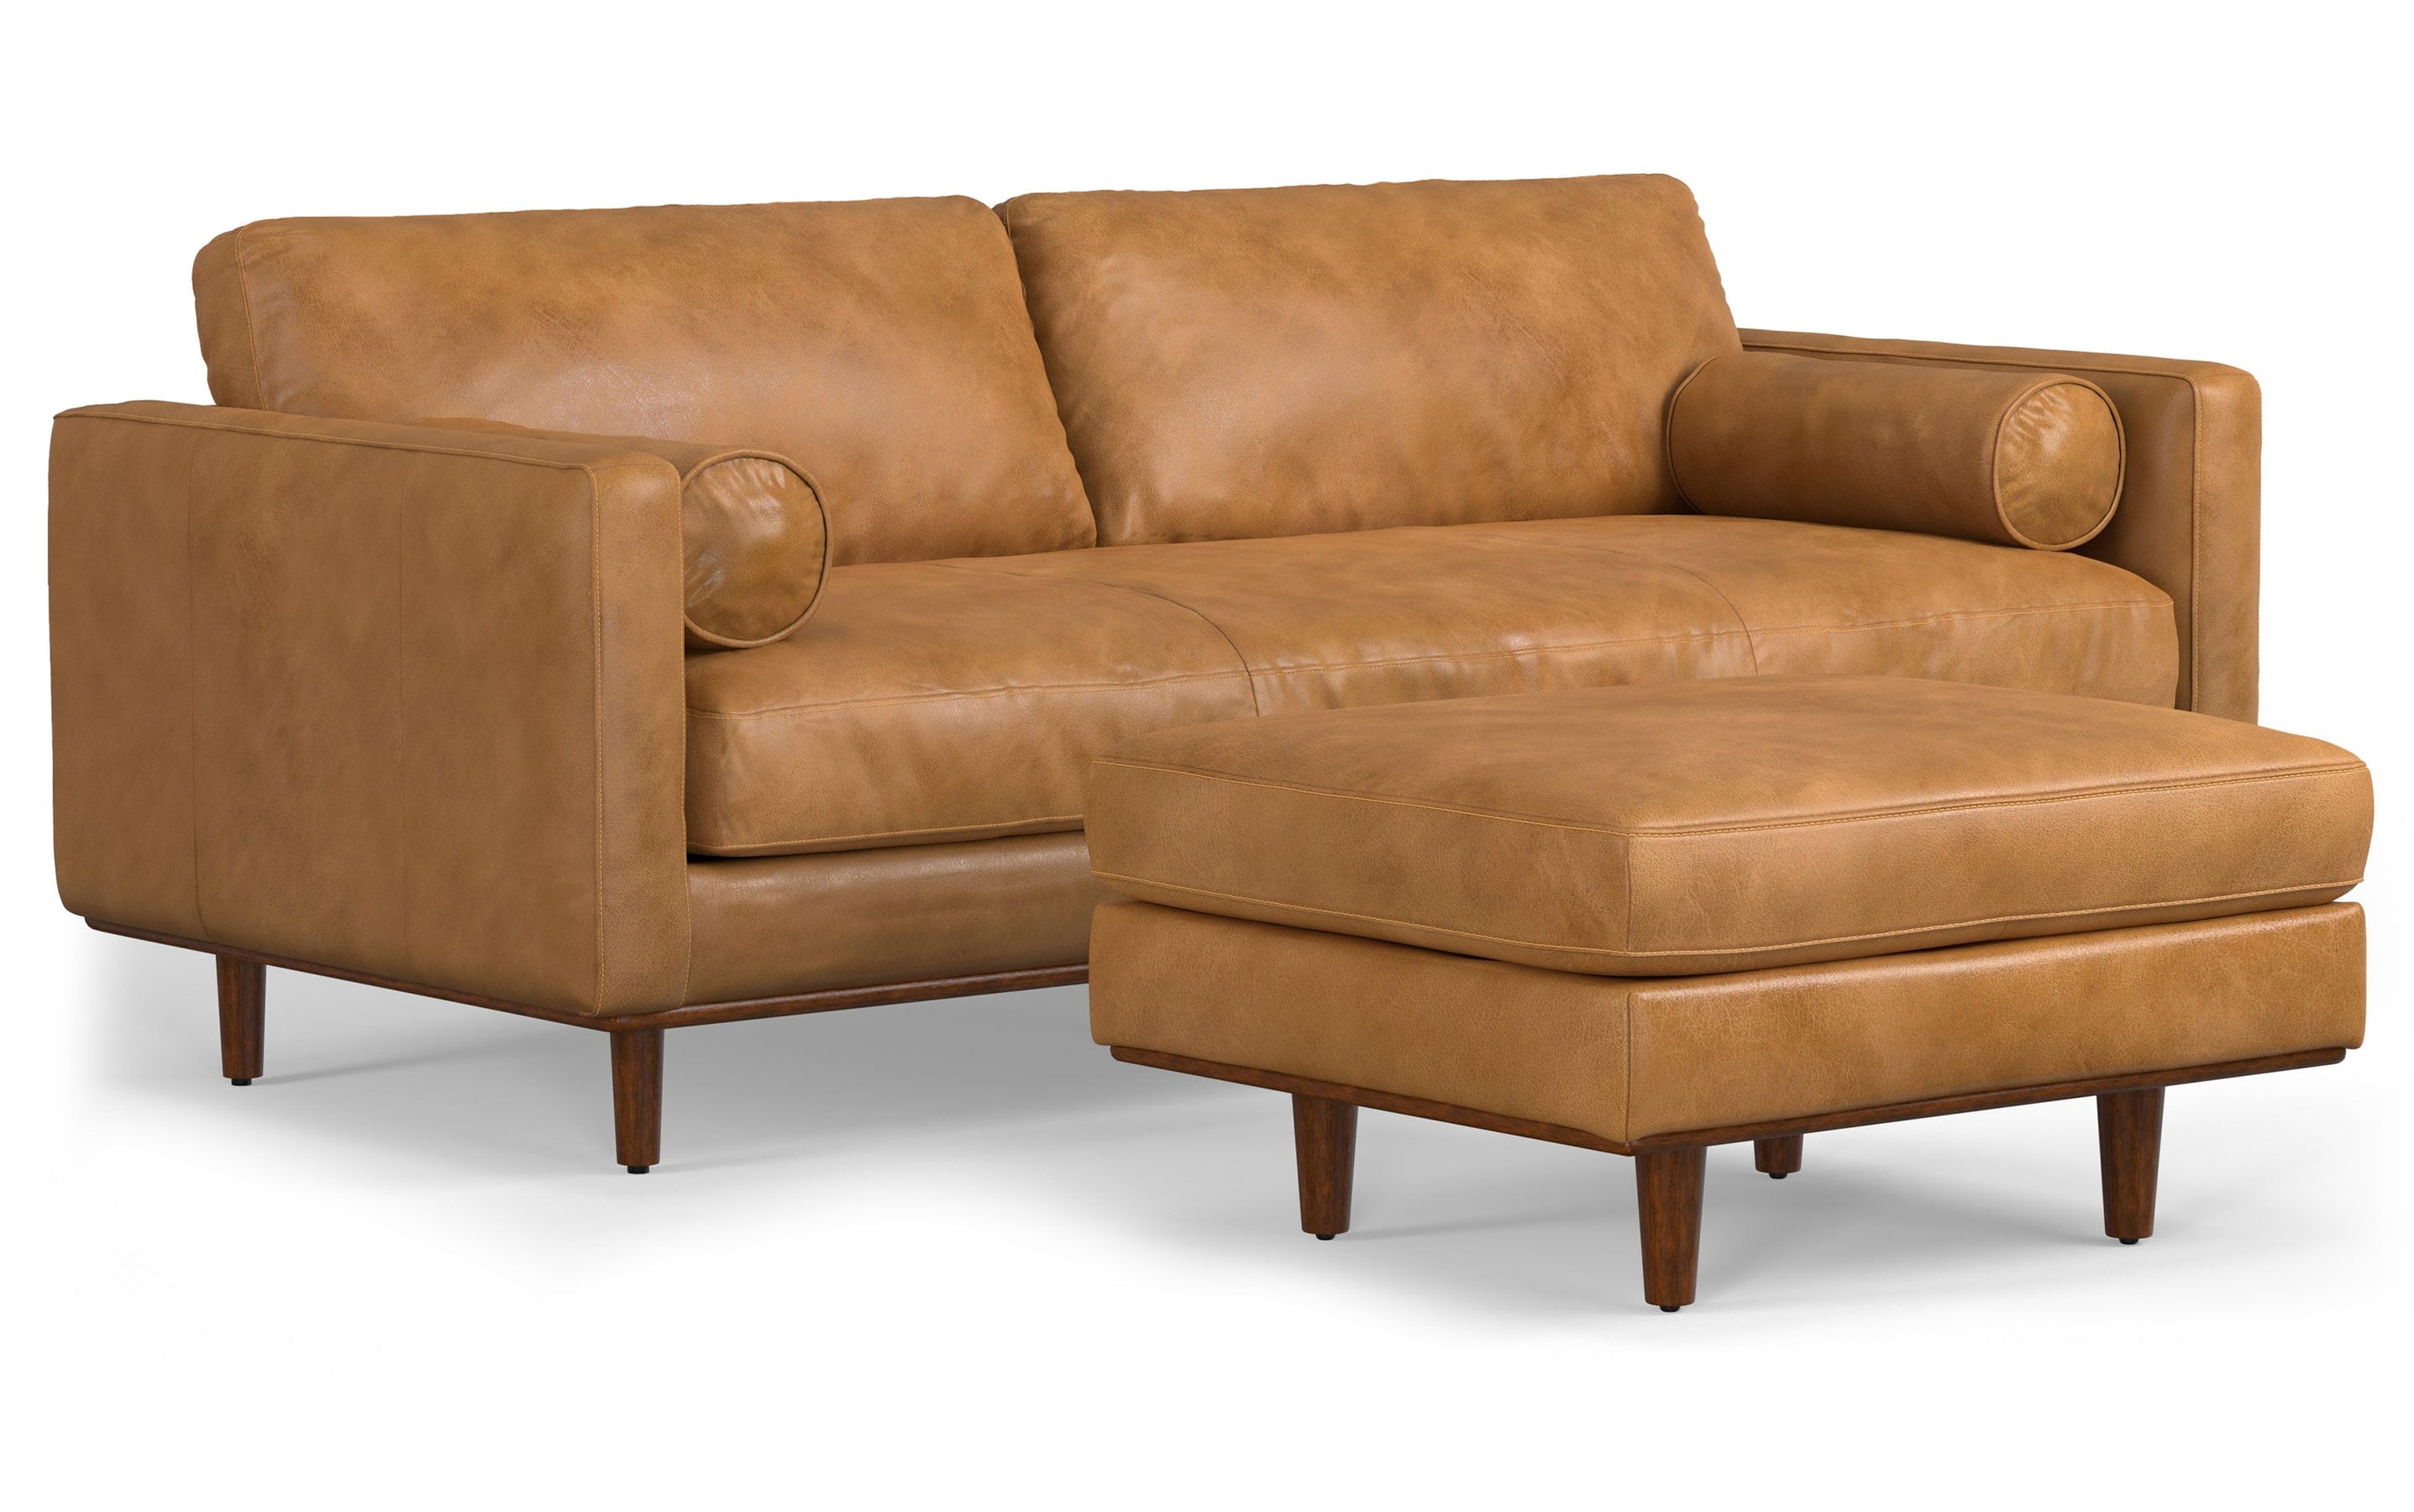 Sienna | Morrison 89-inch Sofa and Ottoman Set in Genuine Leather